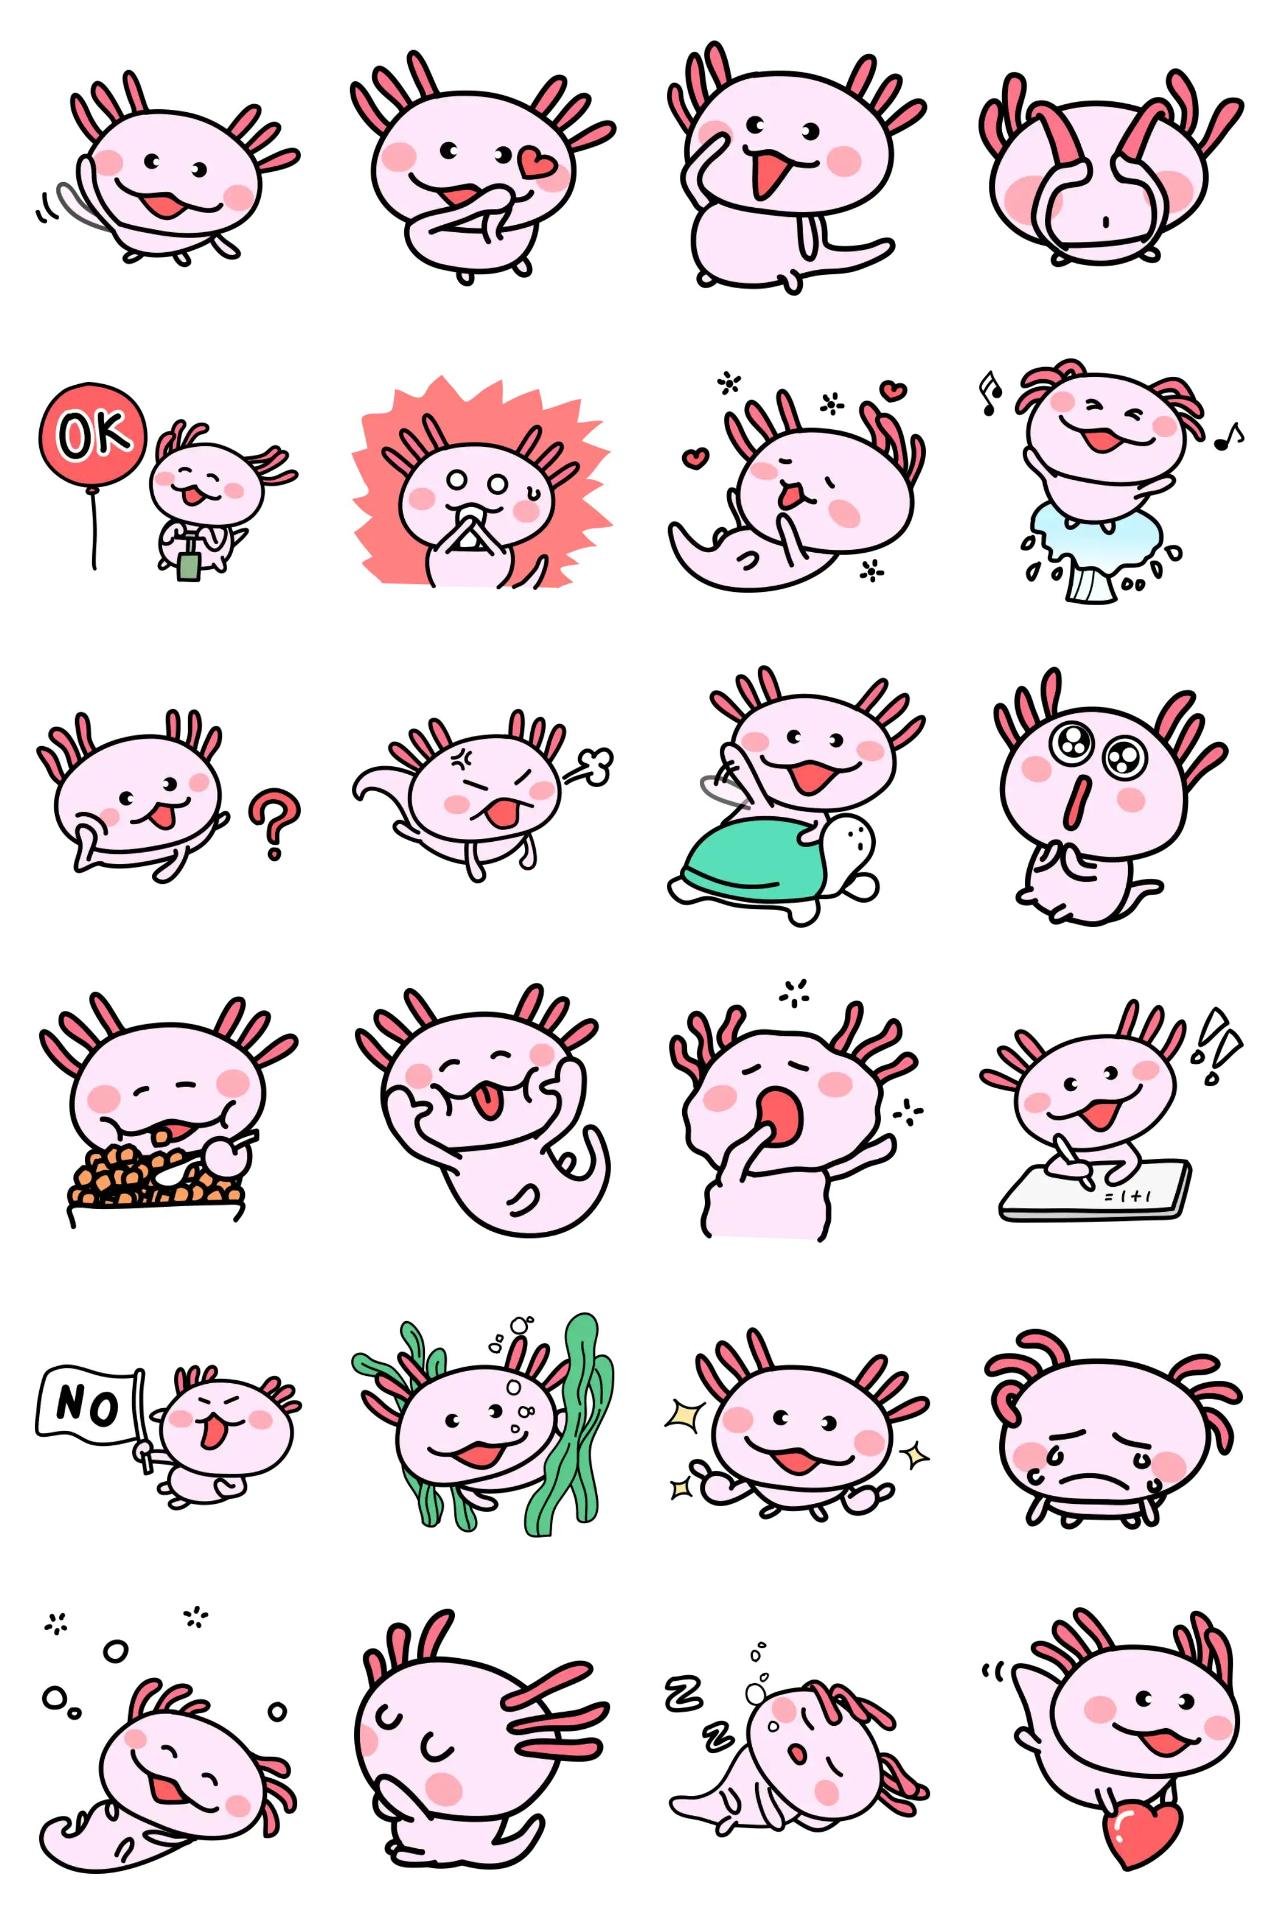 Woparupa Animals sticker pack for Whatsapp, Telegram, Signal, and others chatting and message apps